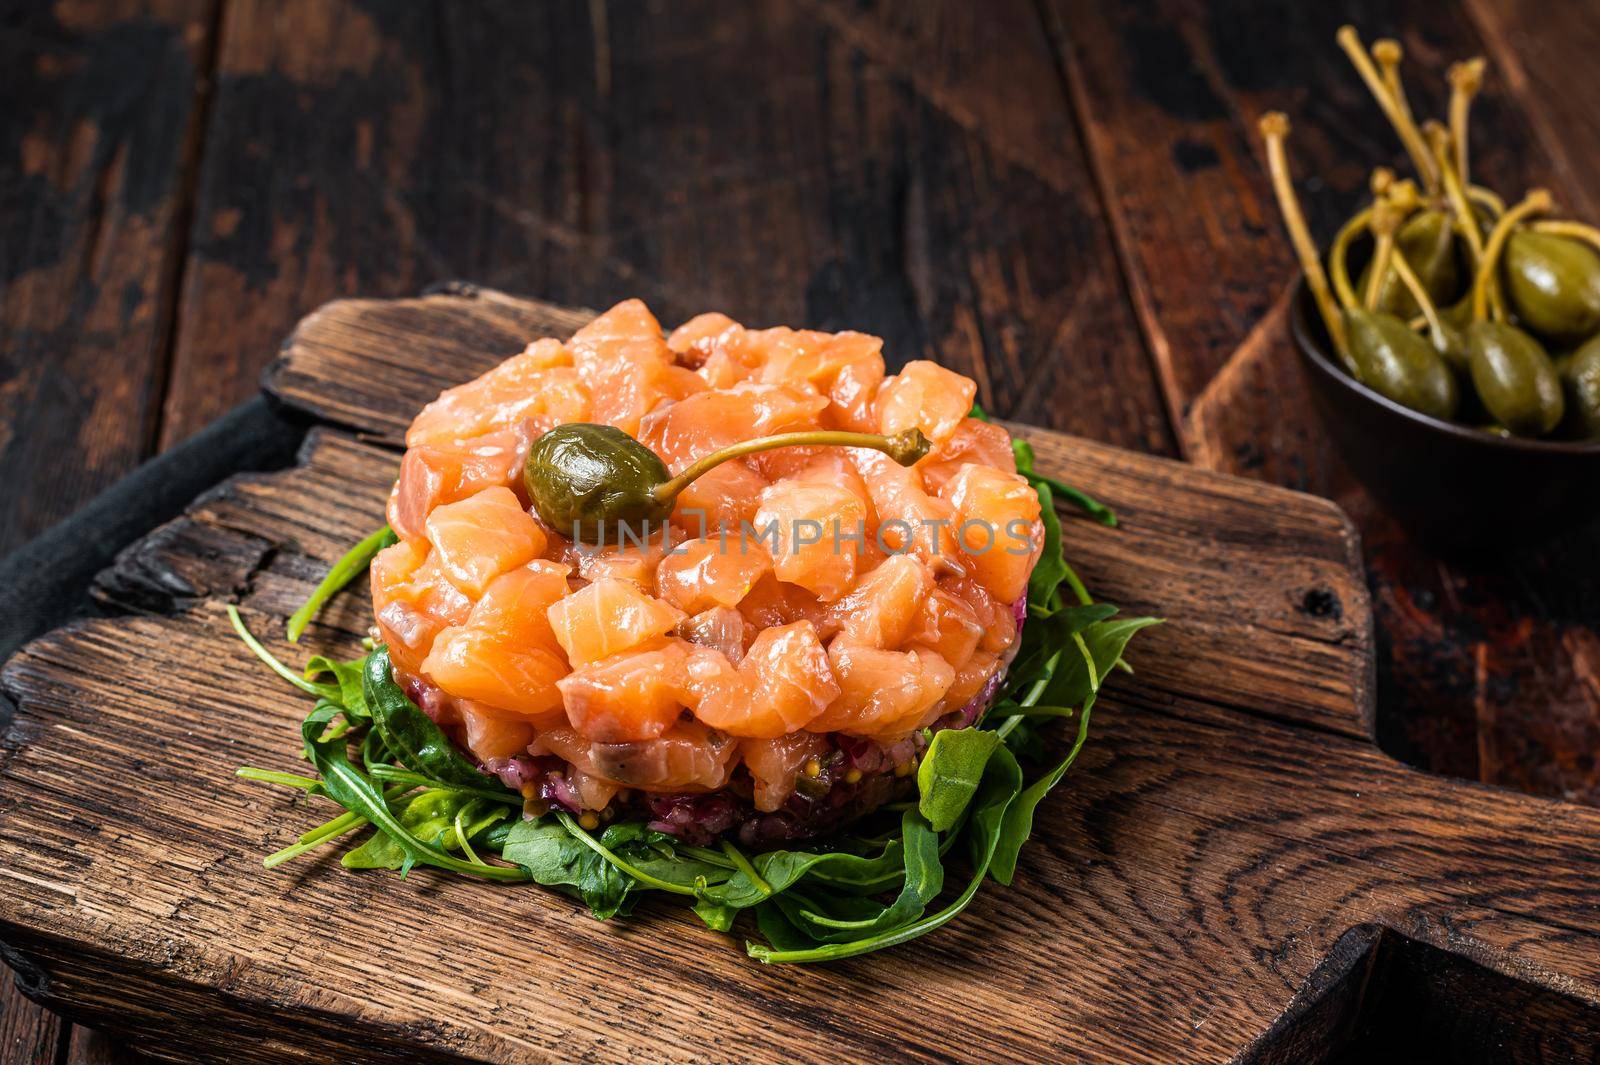 Salmon tartare or tartar with red onion, avocado, arugula and capers. Dark wooden background. Top View by Composter